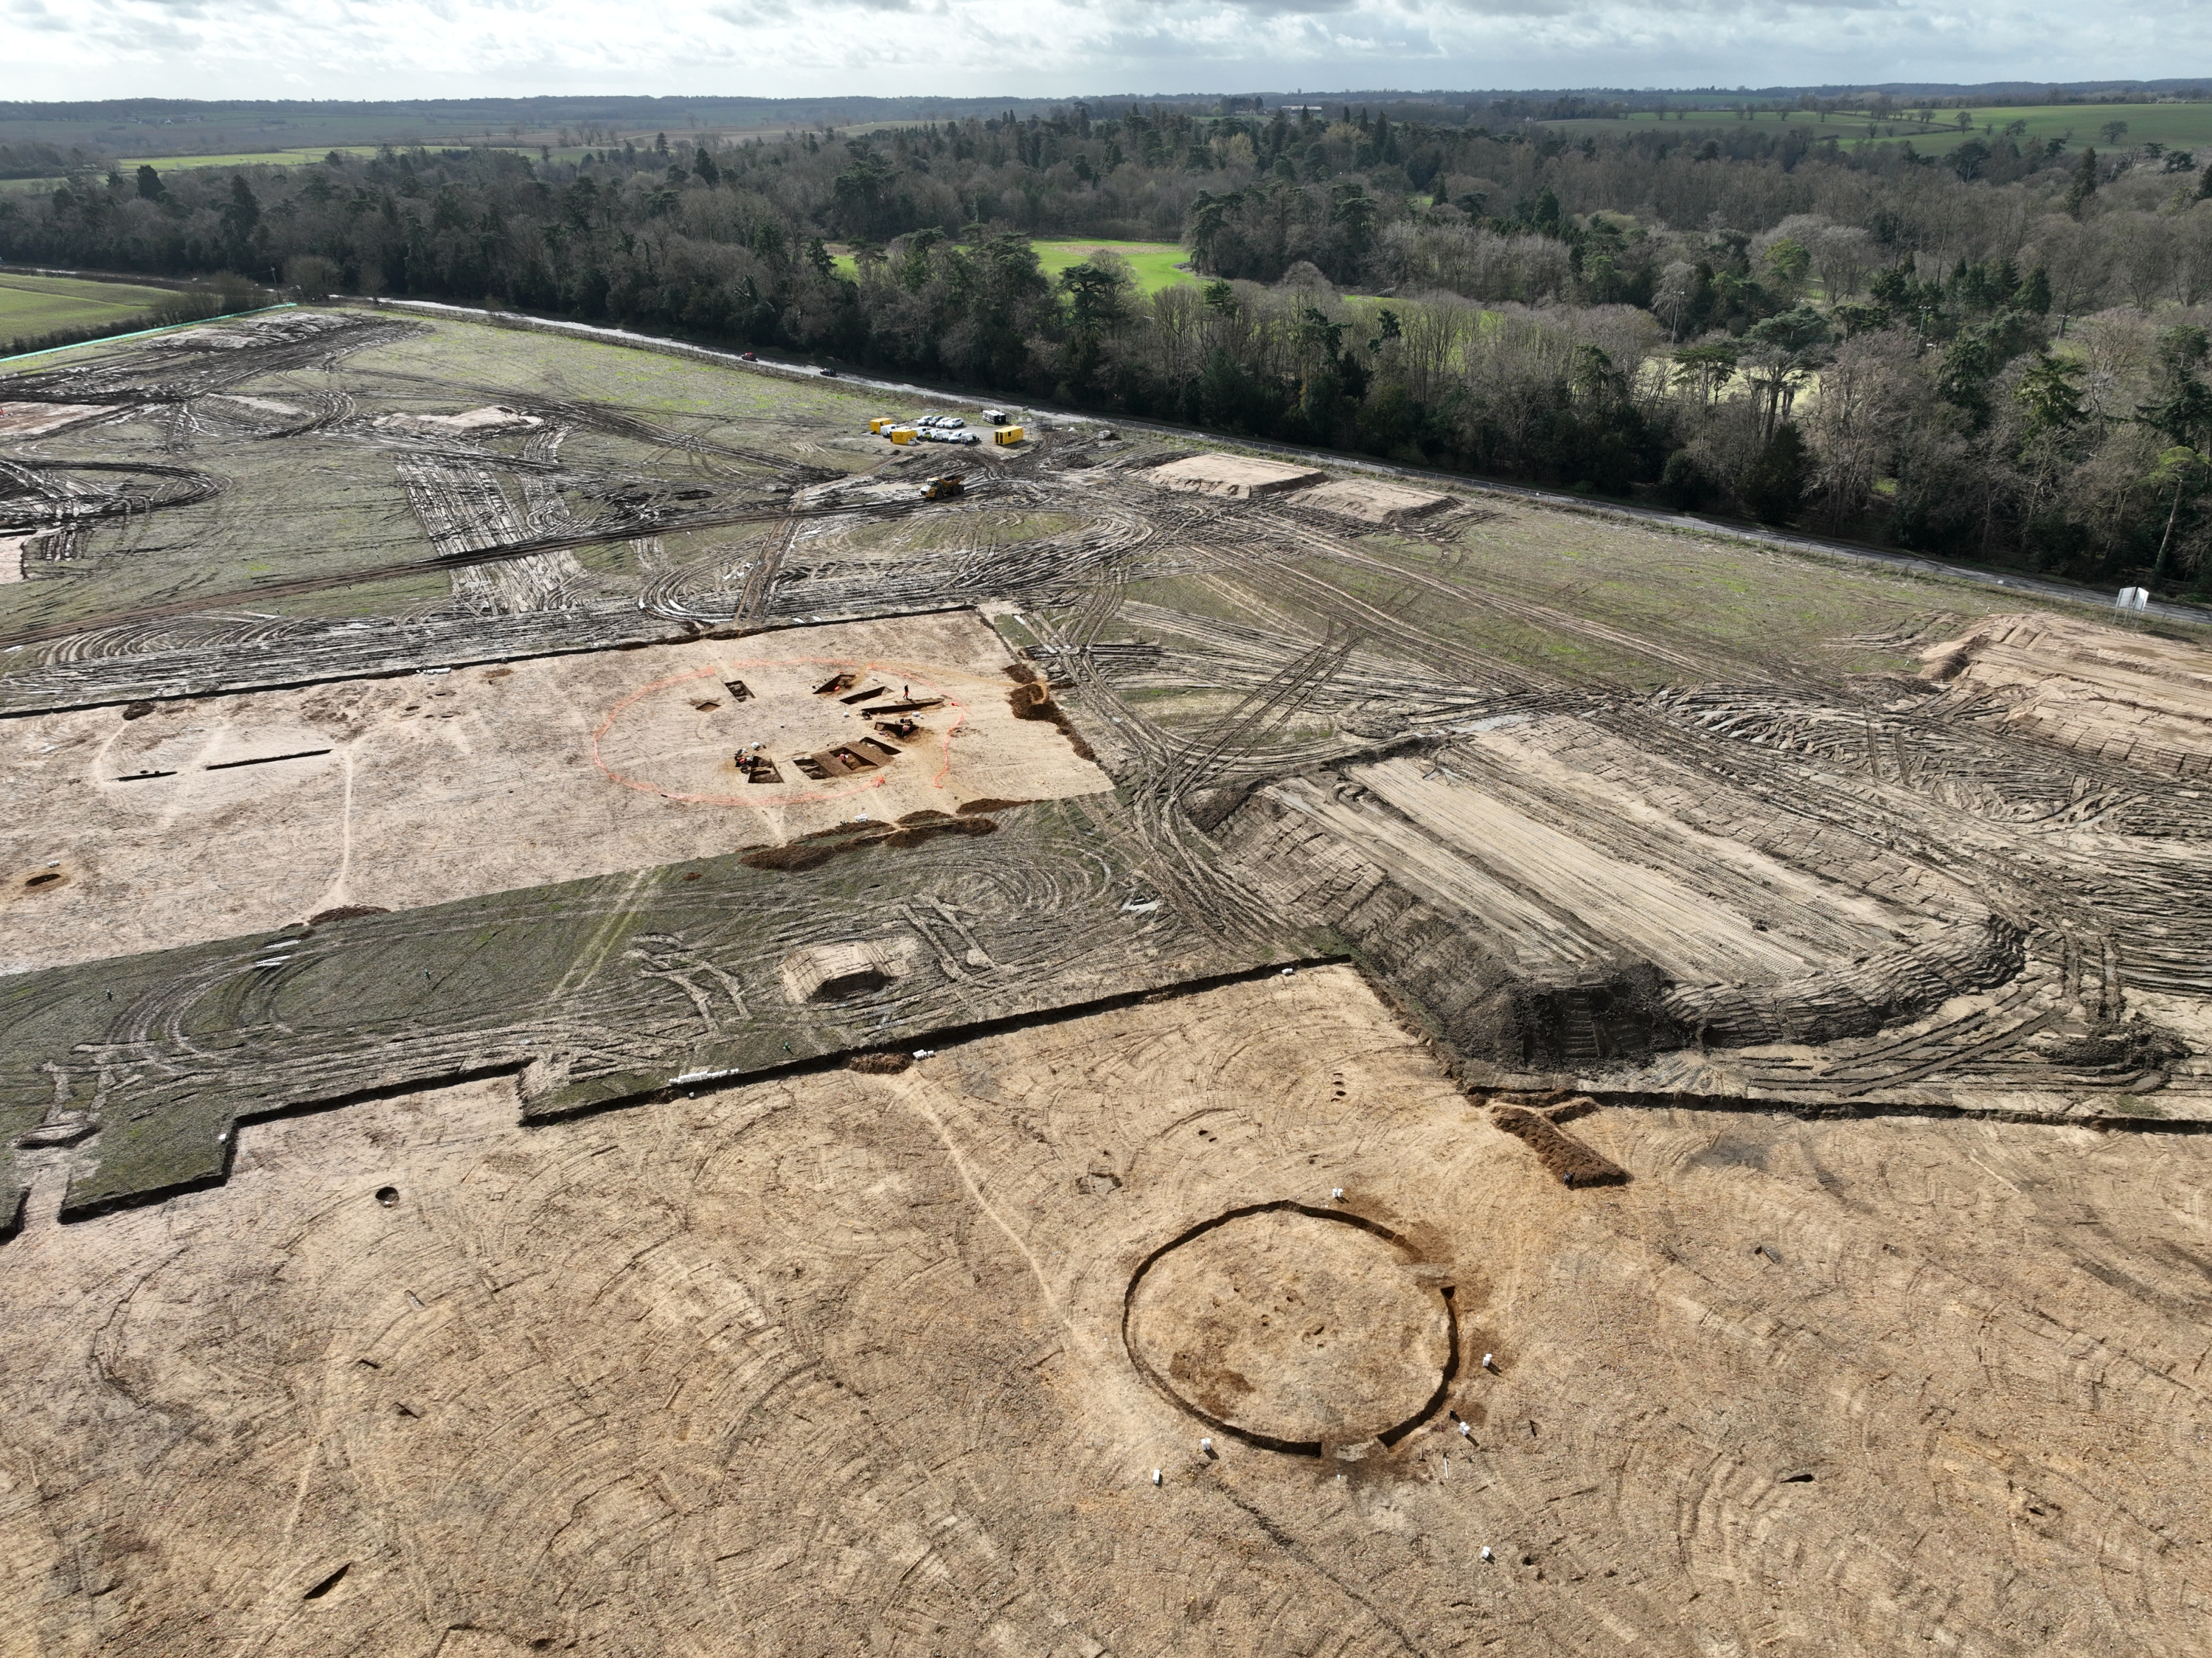 Drone view of the ring ditch and barrow henge.